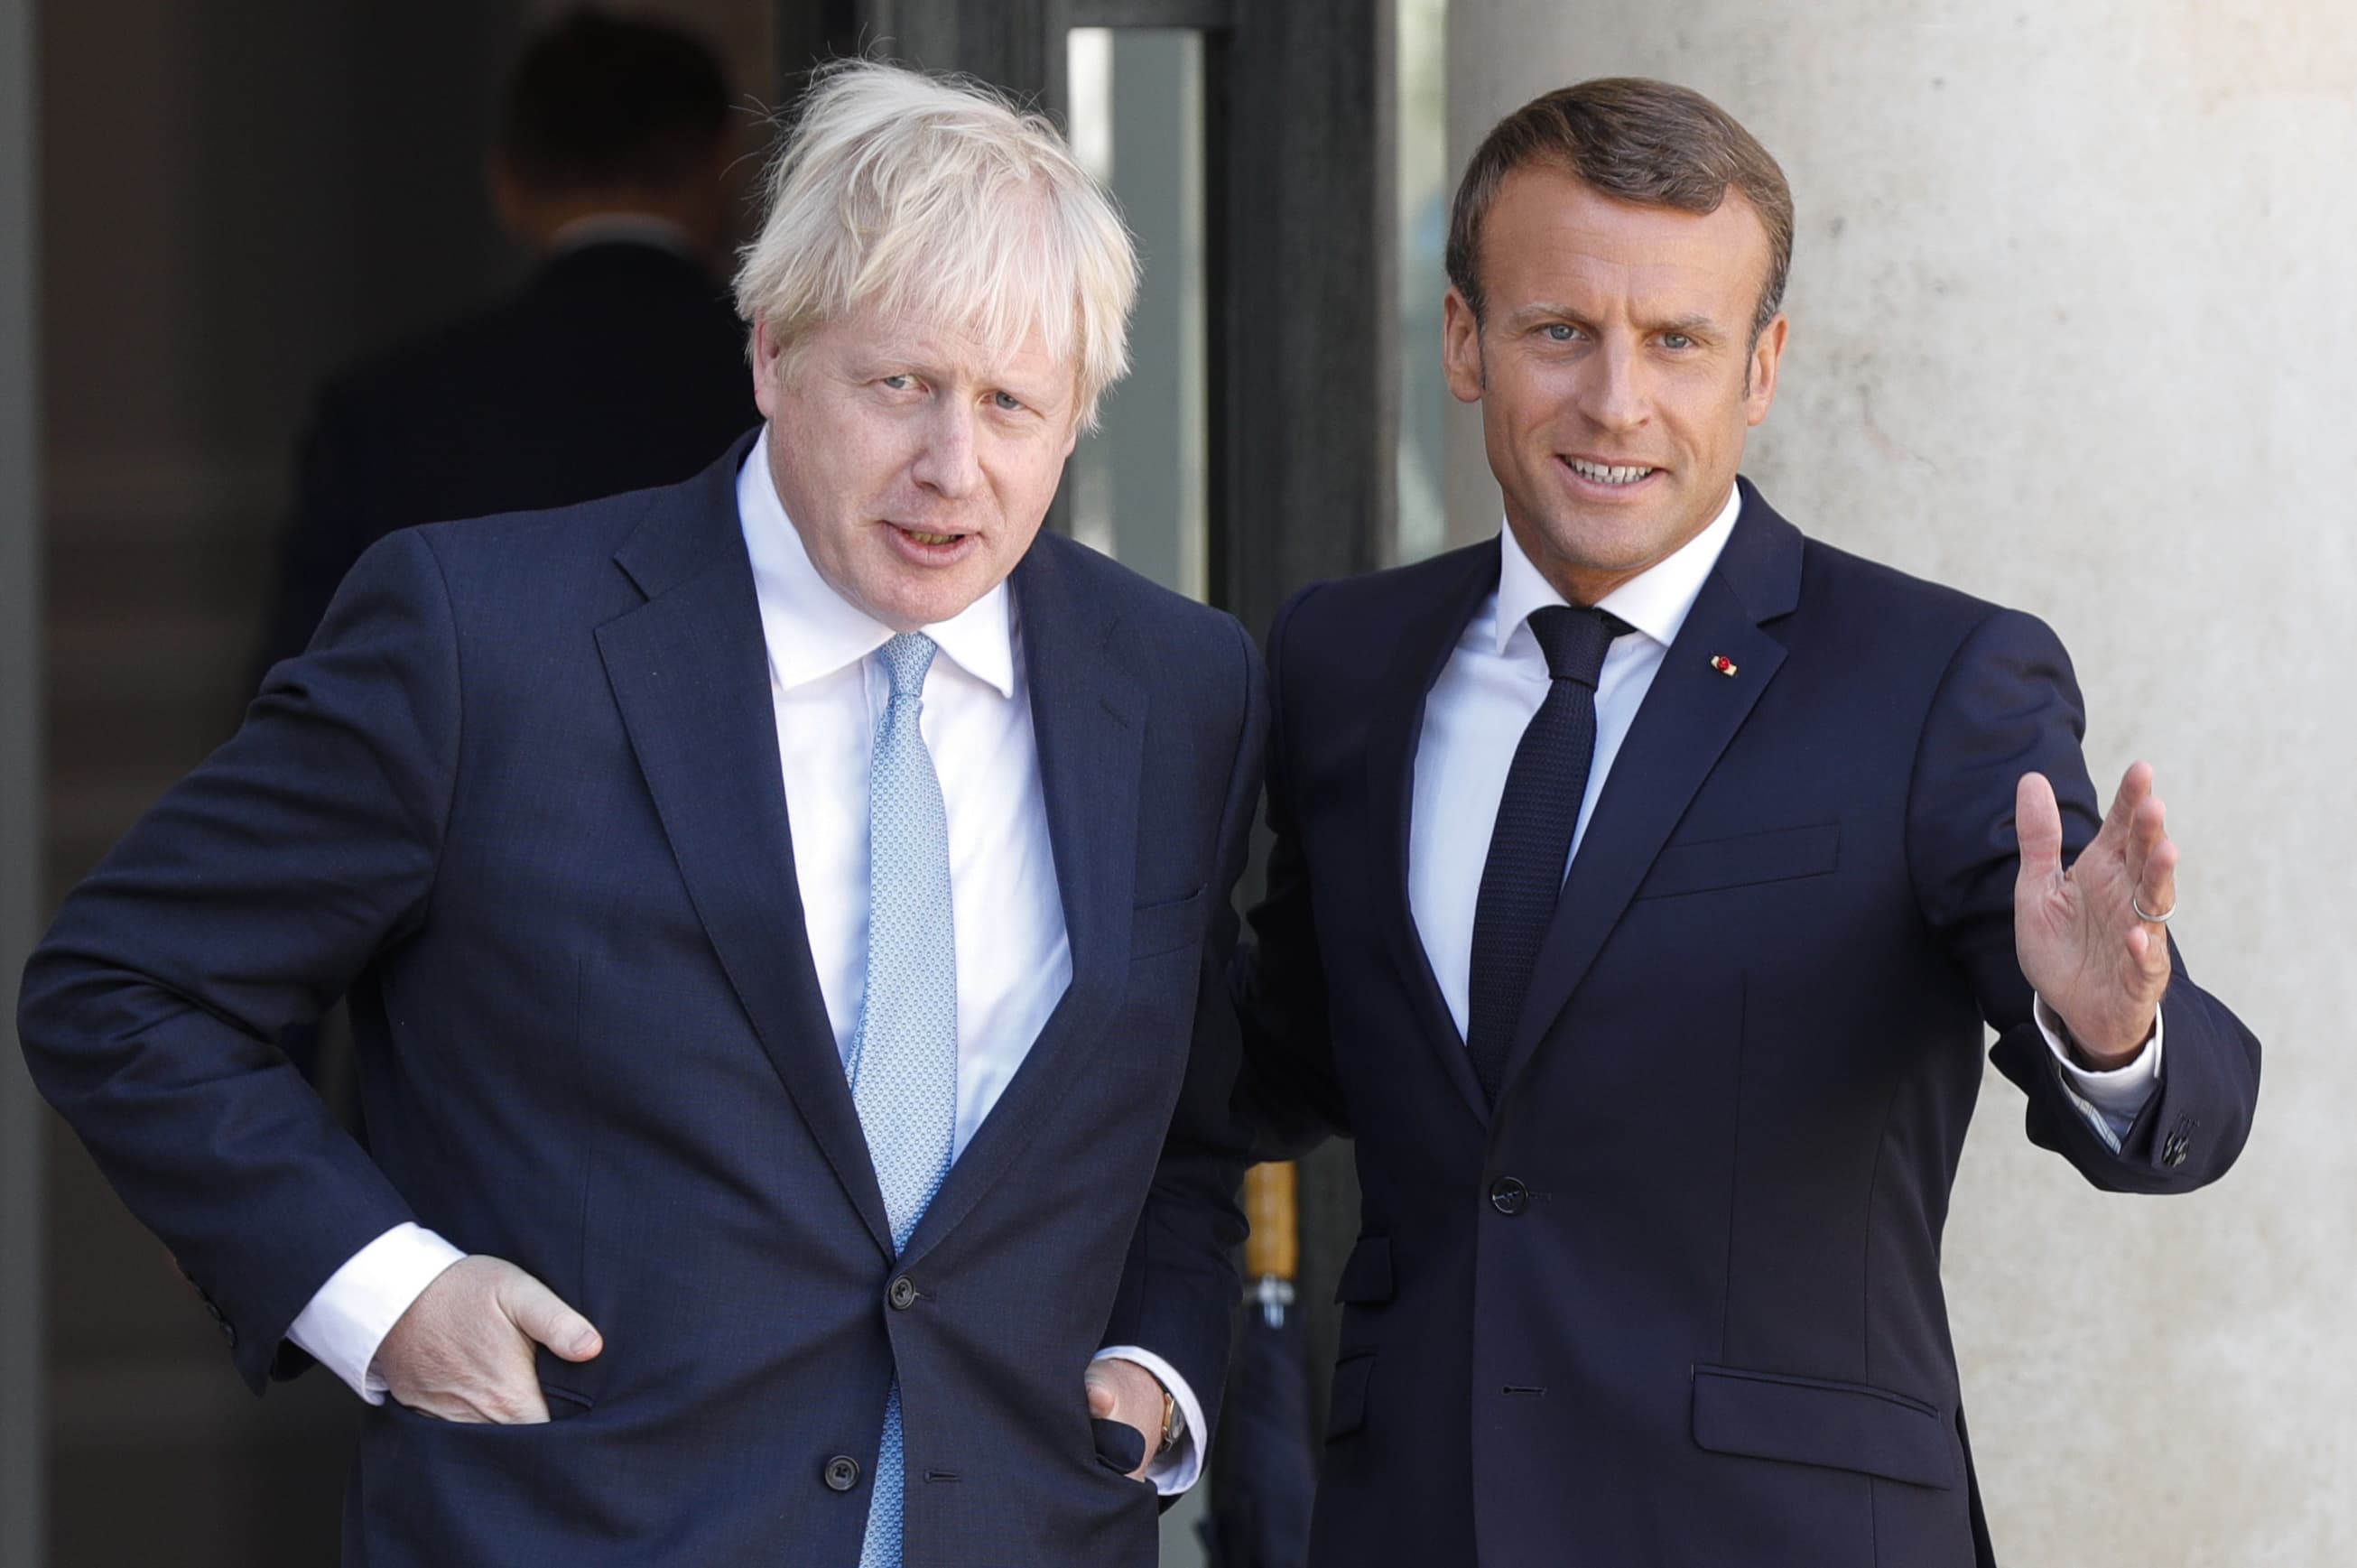 Macron offers UK’s Johnson ‘Le reset’ if he keeps his Brexit word